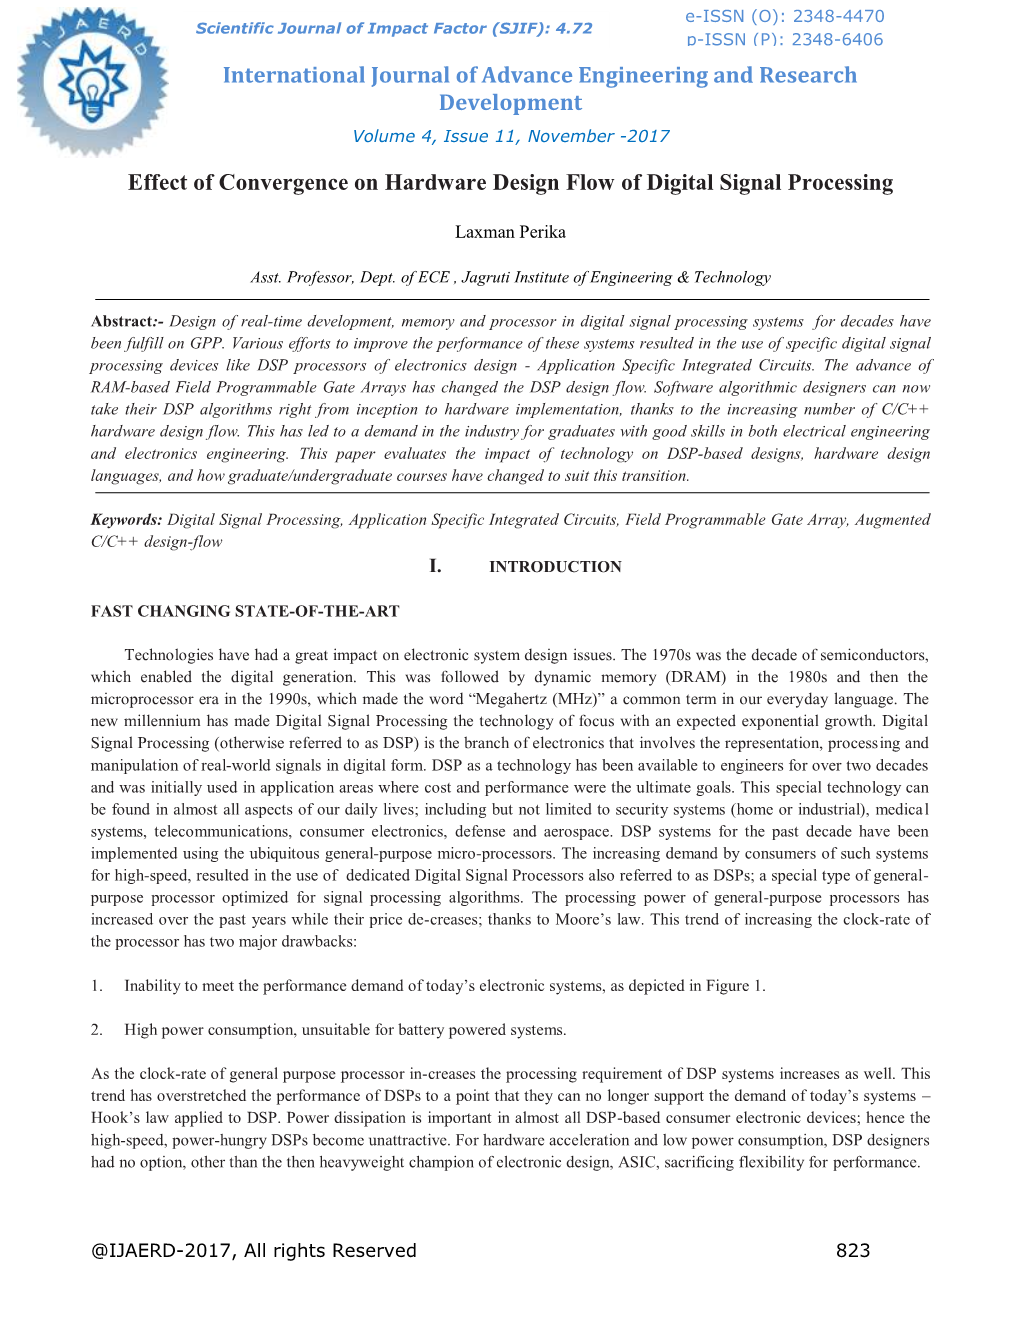 Effect of Convergence on Hardware Design Flow of Digital Signal Processing